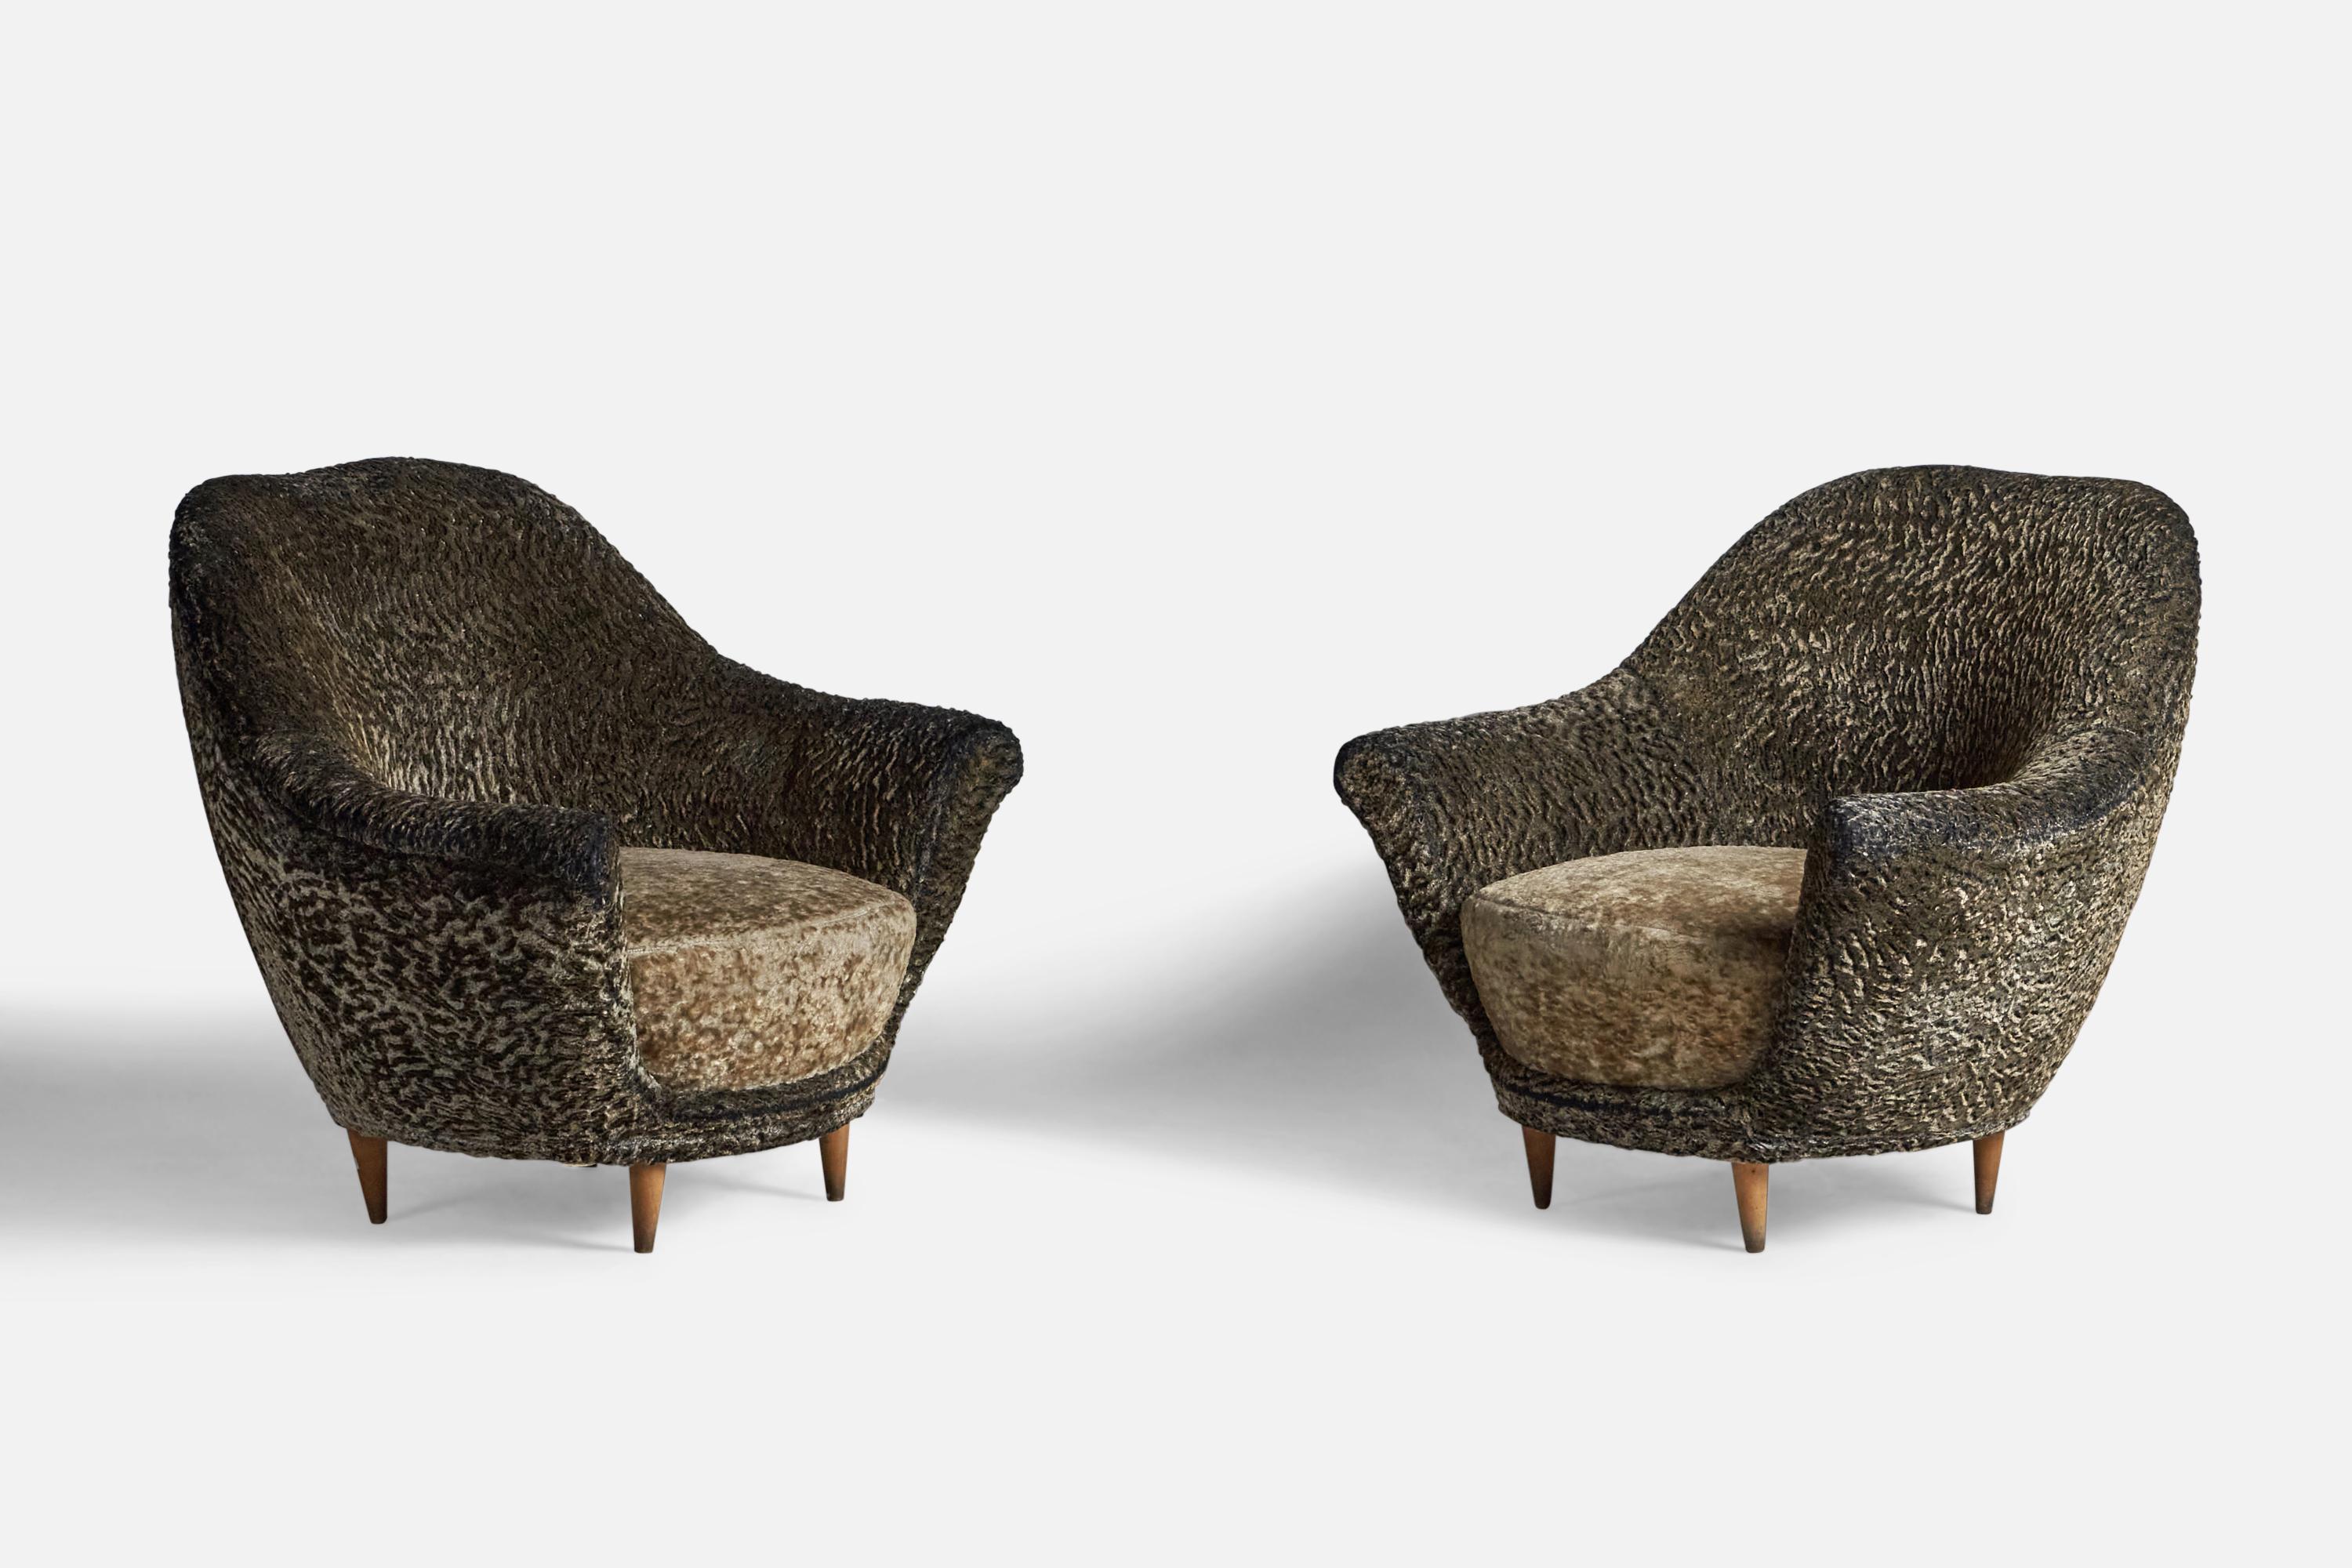 A pair of wood and fabric lounge chairs, designed and produced by Federico Munari, Italy, 1940s.

14.5